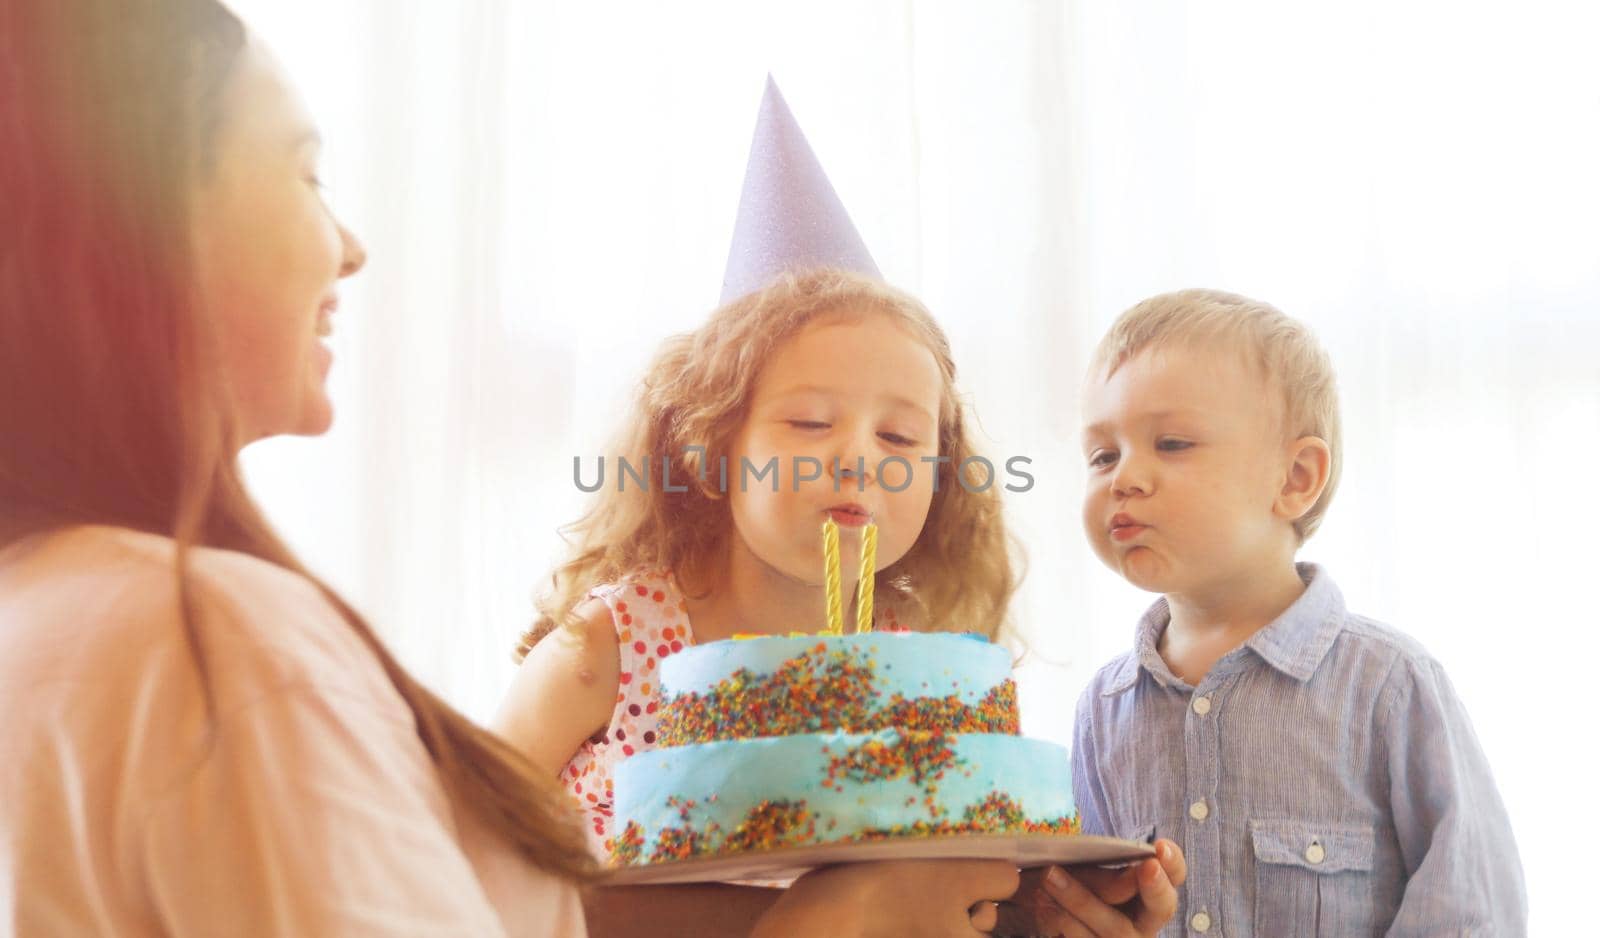 Children blowing candles on cake by Demkat